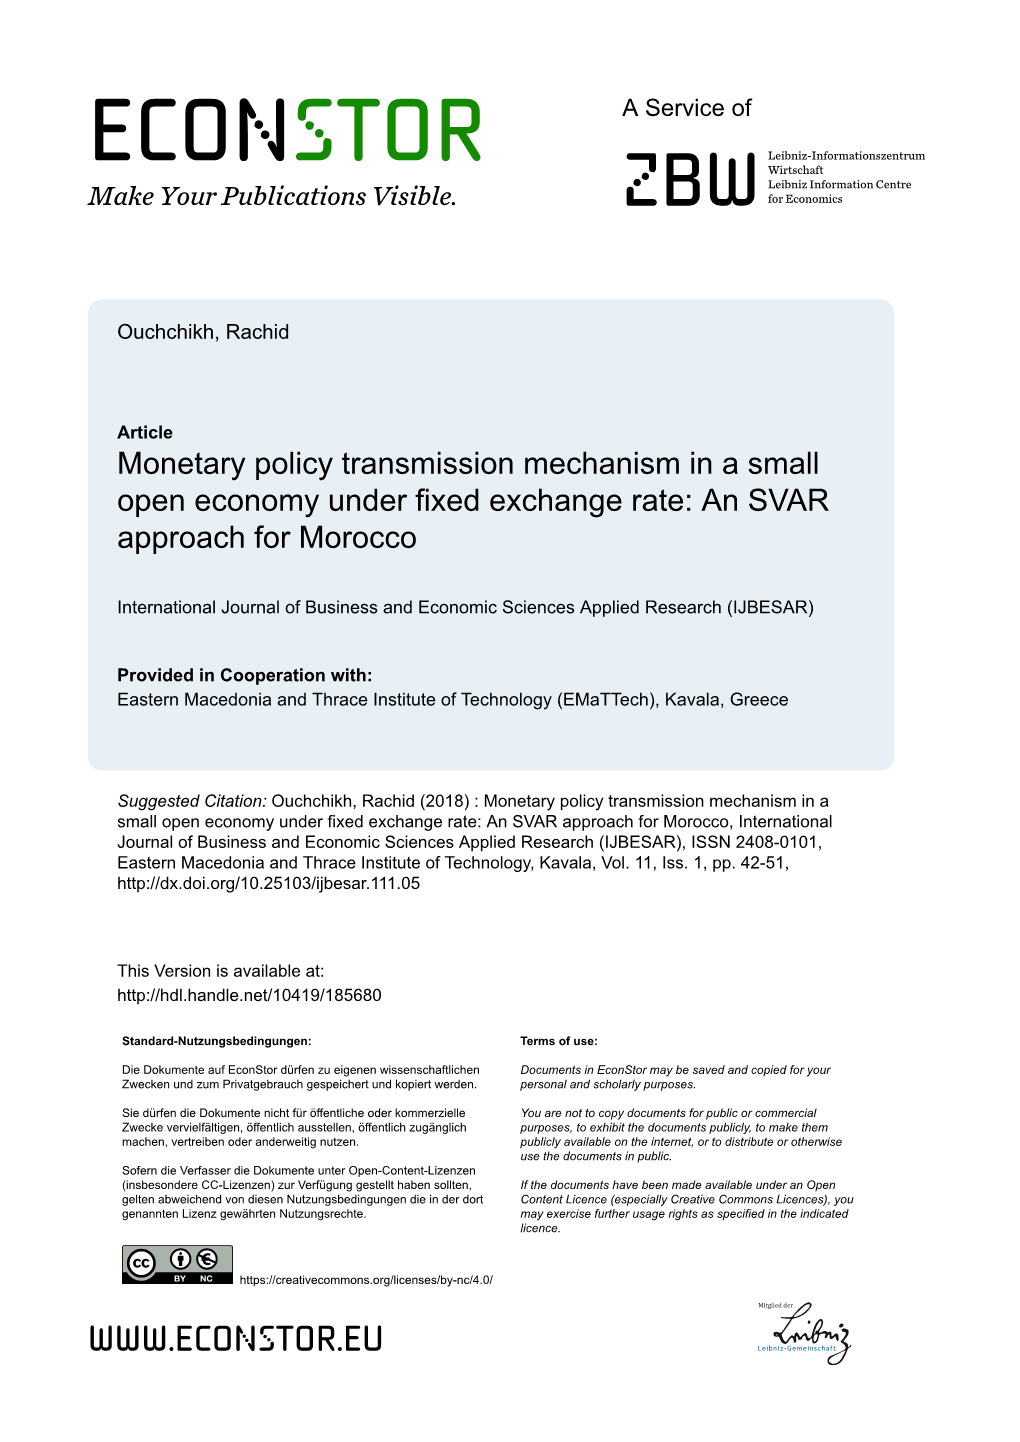 Monetary Policy Transmission Mechanism in a Small Open Economy Under Fixed Exchange Rate: an SVAR Approach for Morocco